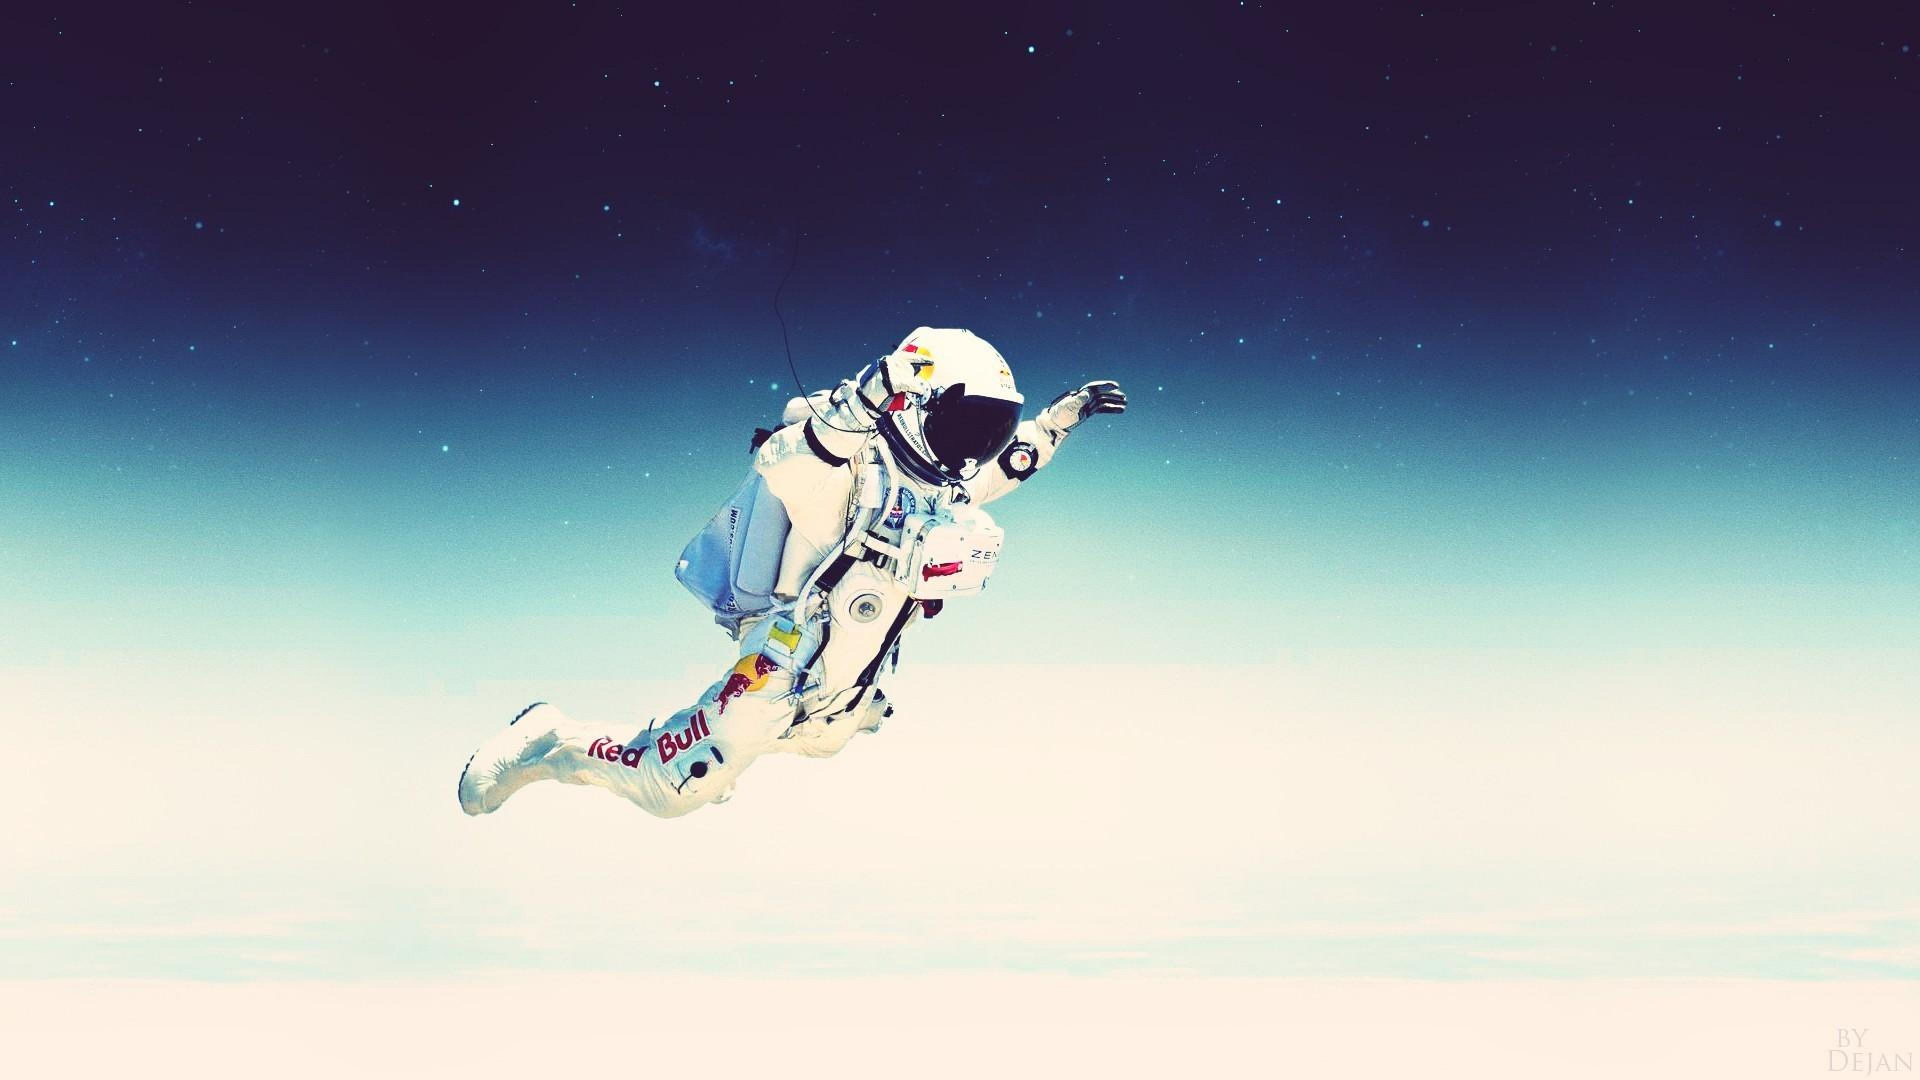 Man in White and Blue Suit Doing Sky Diving. Wallpaper in 1920x1080 Resolution